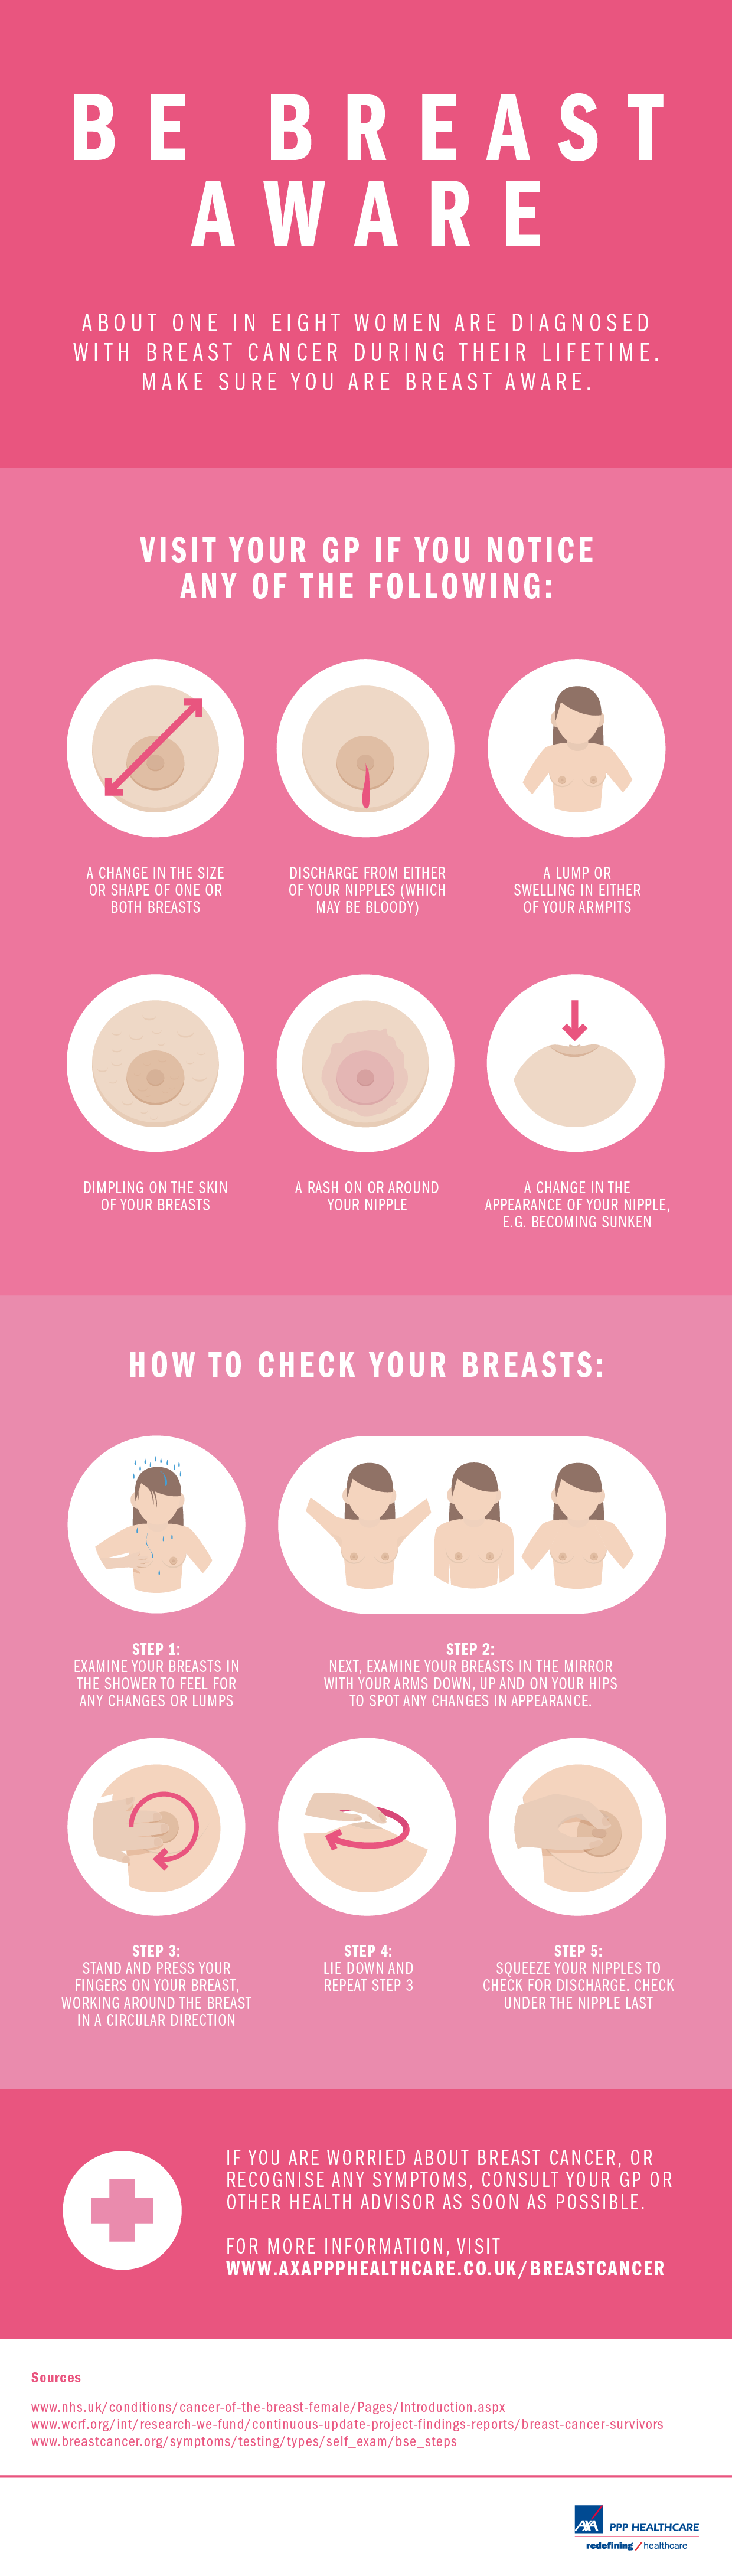 Breast cancer infographic_SMC_V001_symptoms and checking